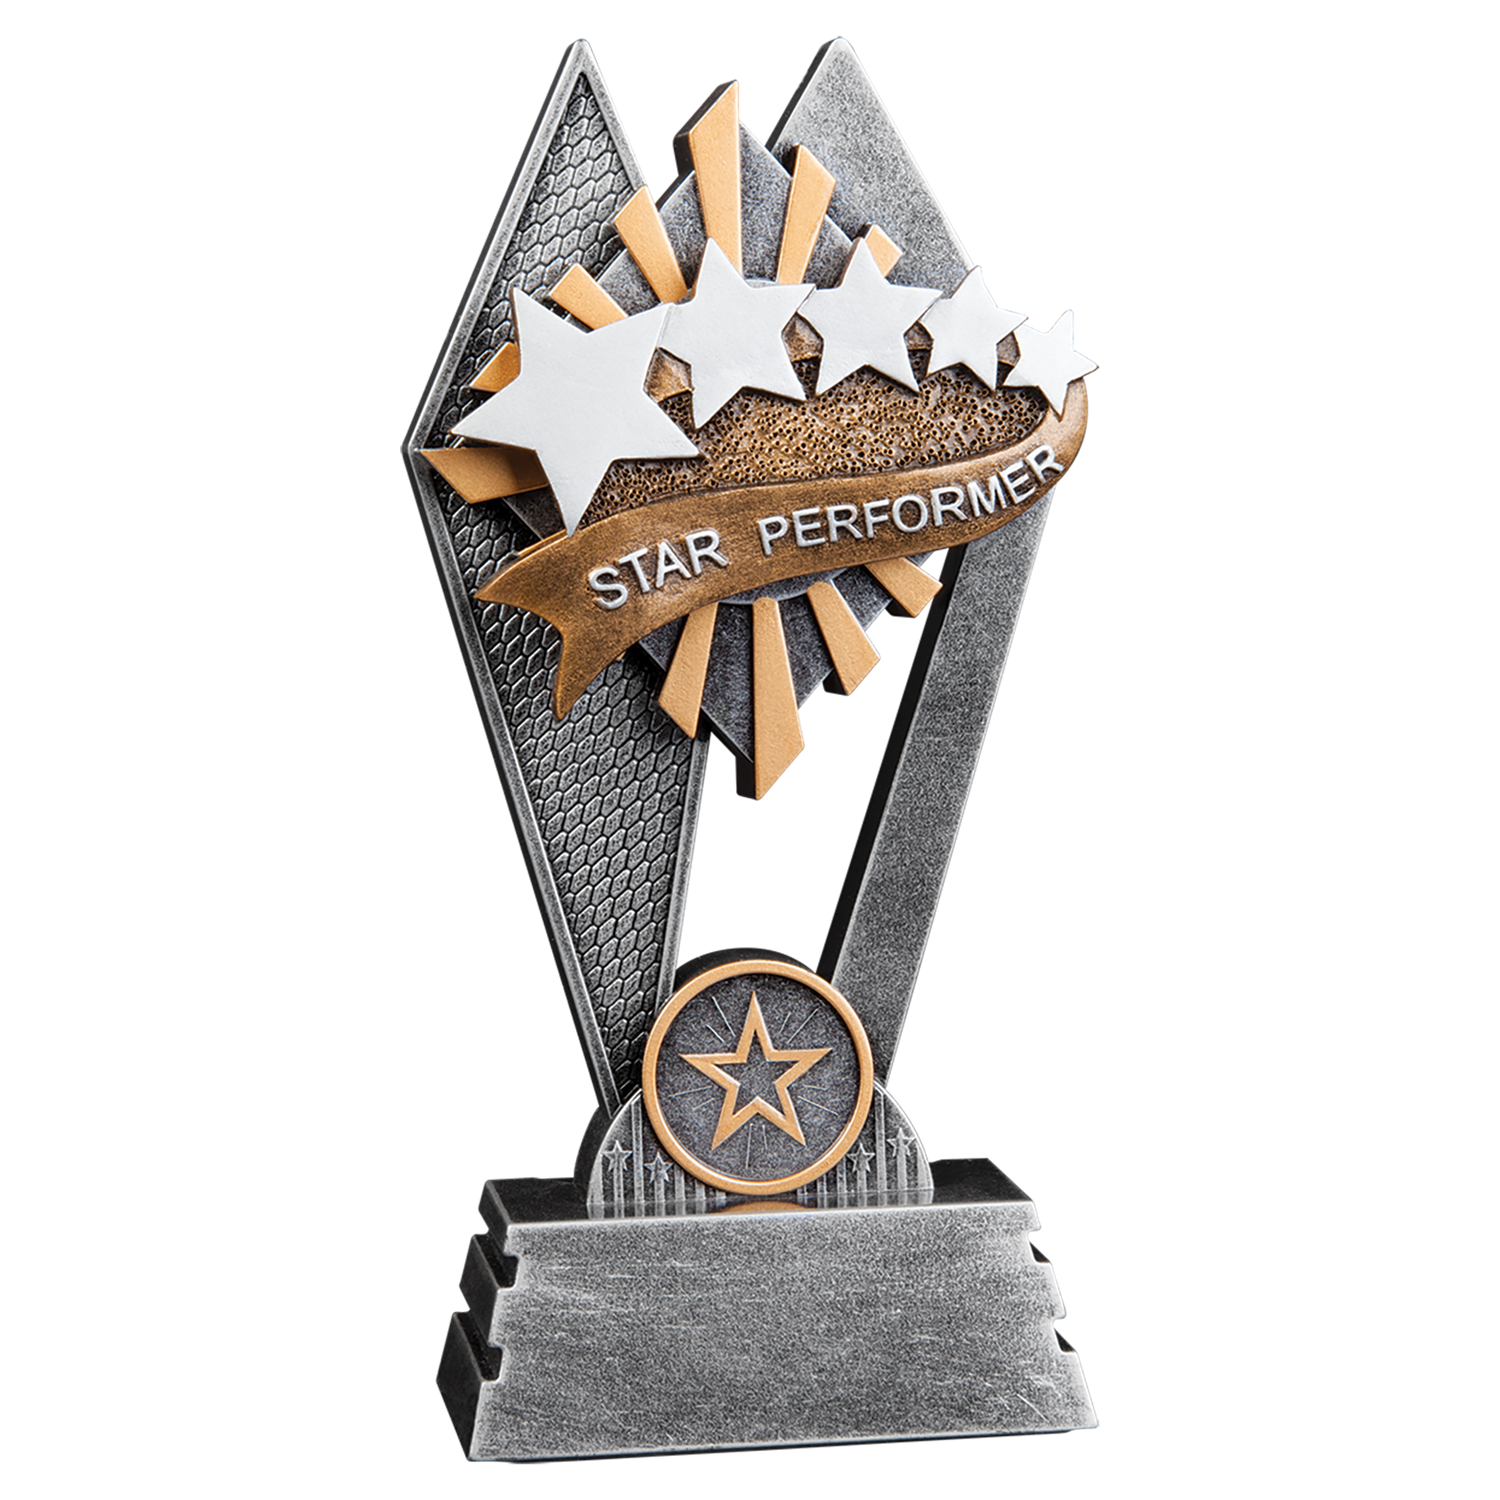 Sun Ray Star Performer Trophy (2 sizes available)